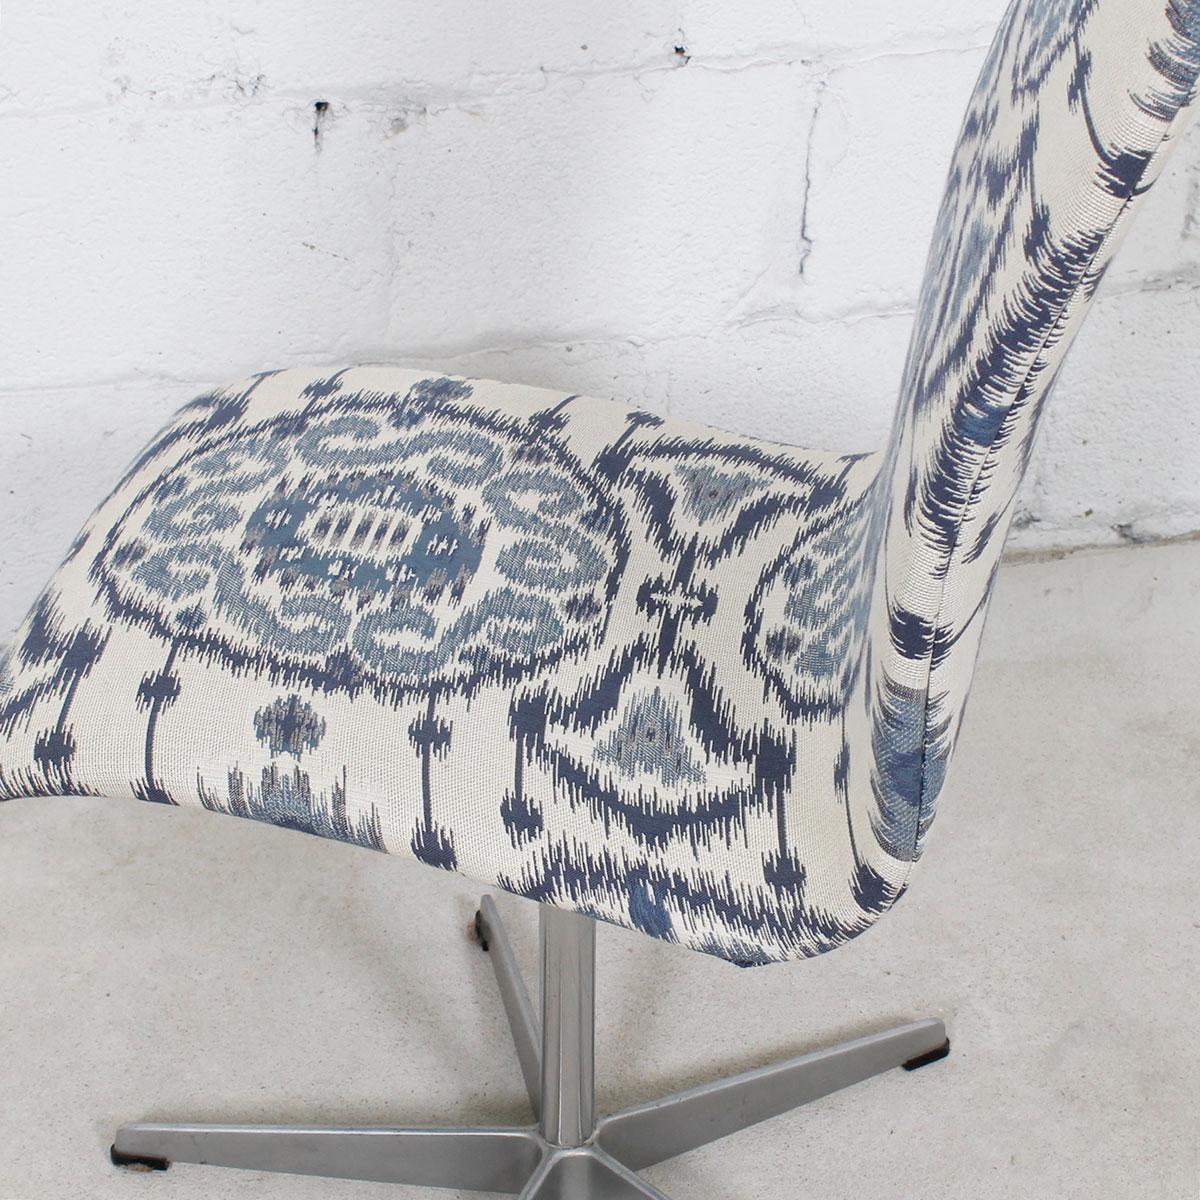 Set of 6 Vintage Fritz Hansen Oxford Chairs in New Blue & White Ikat Upholstery For Sale 5